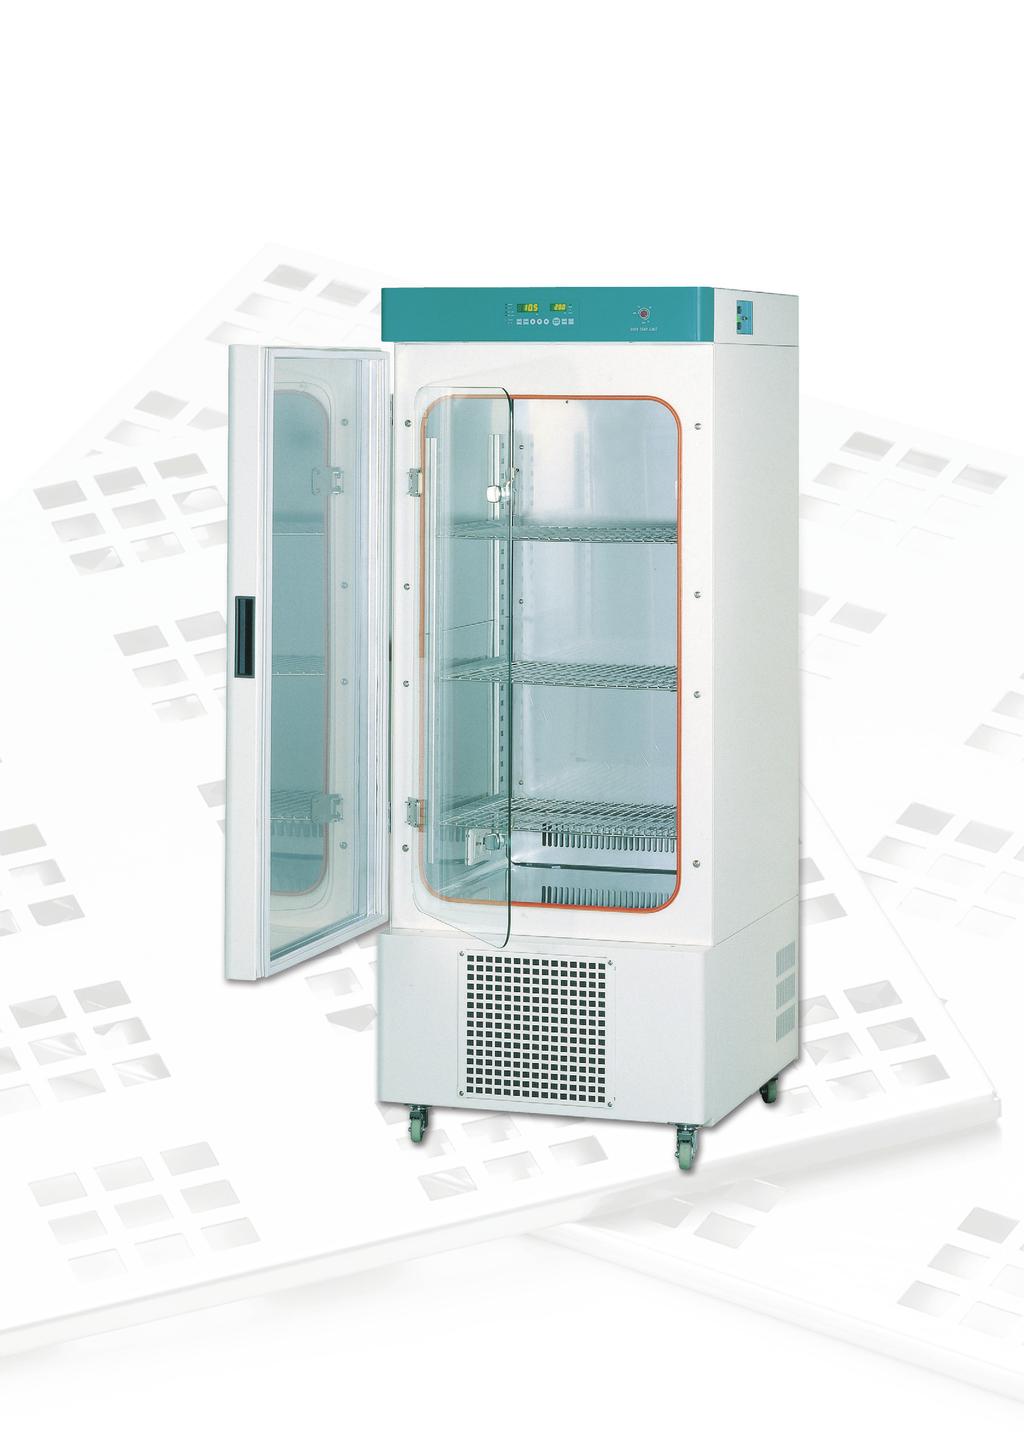 I Low Low - Forced Convection I Intensive low temperature incubating performance with compressor cooling system IL series has an excellent HBP type compressor cooling system which is noiseless and